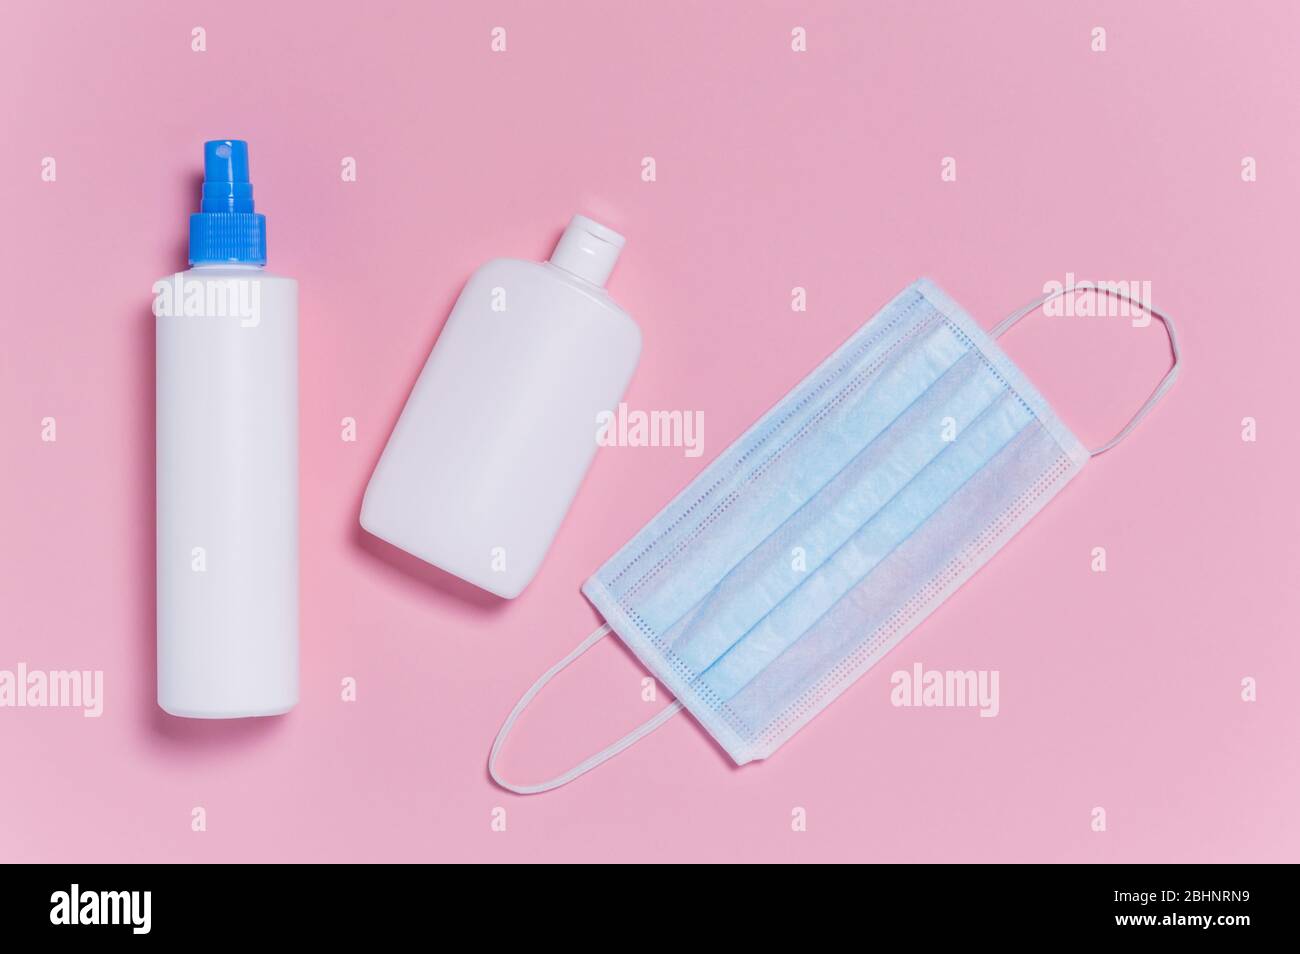 Coronavirus protection. Medical surgical mask and two bottles of disinfectant and alcohol hand sanitizer on pink background. Hygiene measures to preve Stock Photo